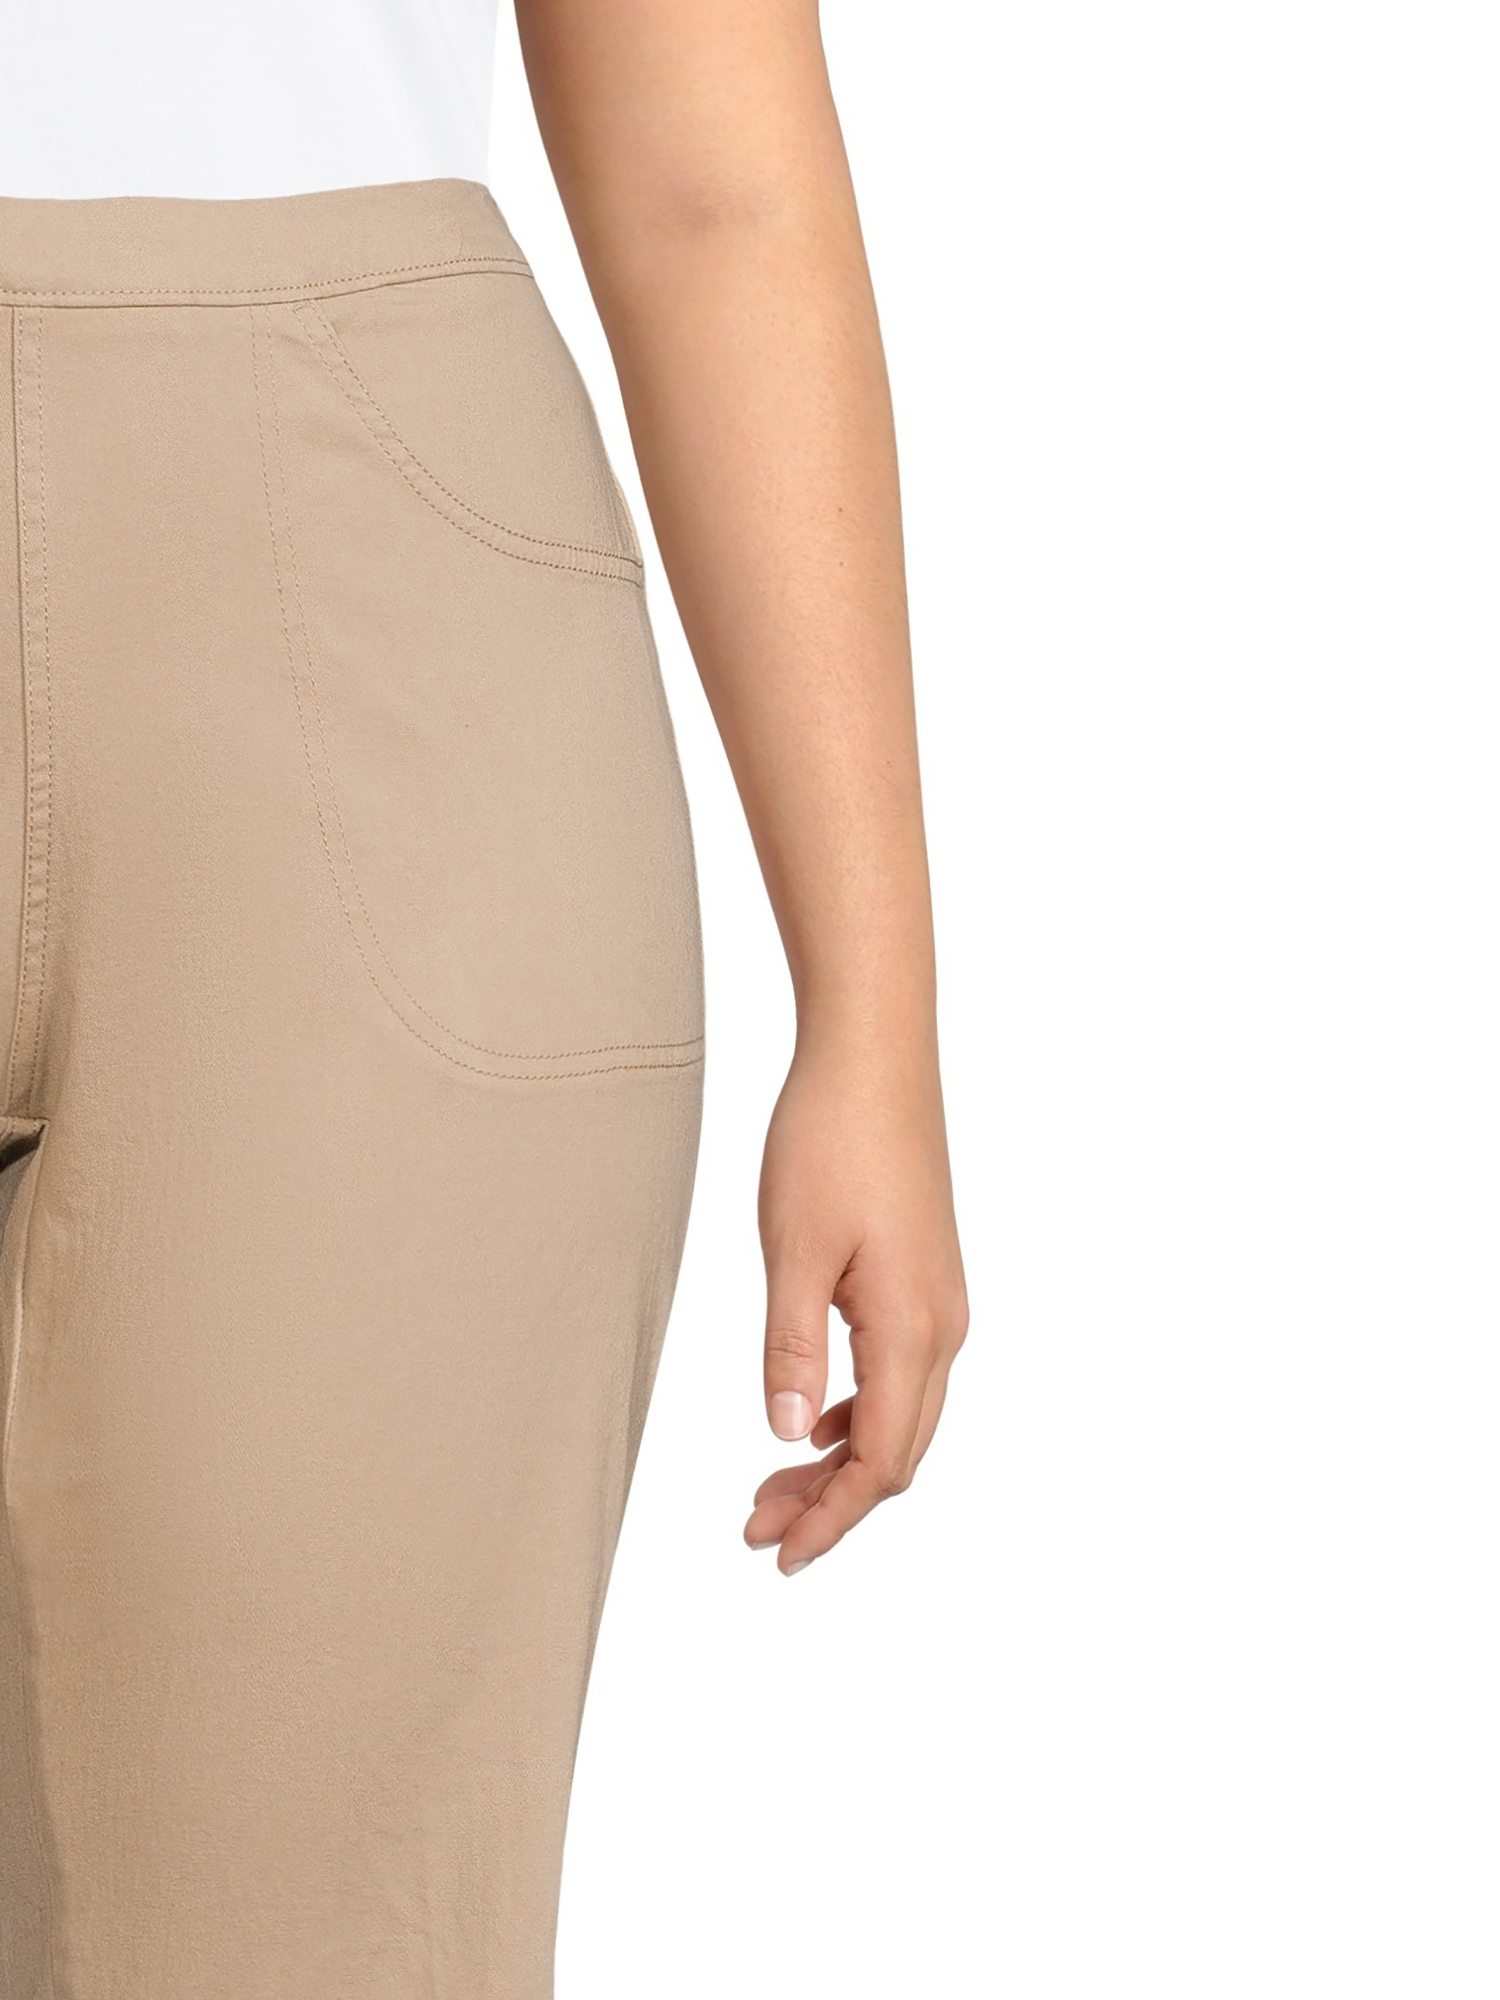 Just My Size Women's Plus Size Pull On 2 Pocket Stretch Capri - image 2 of 6